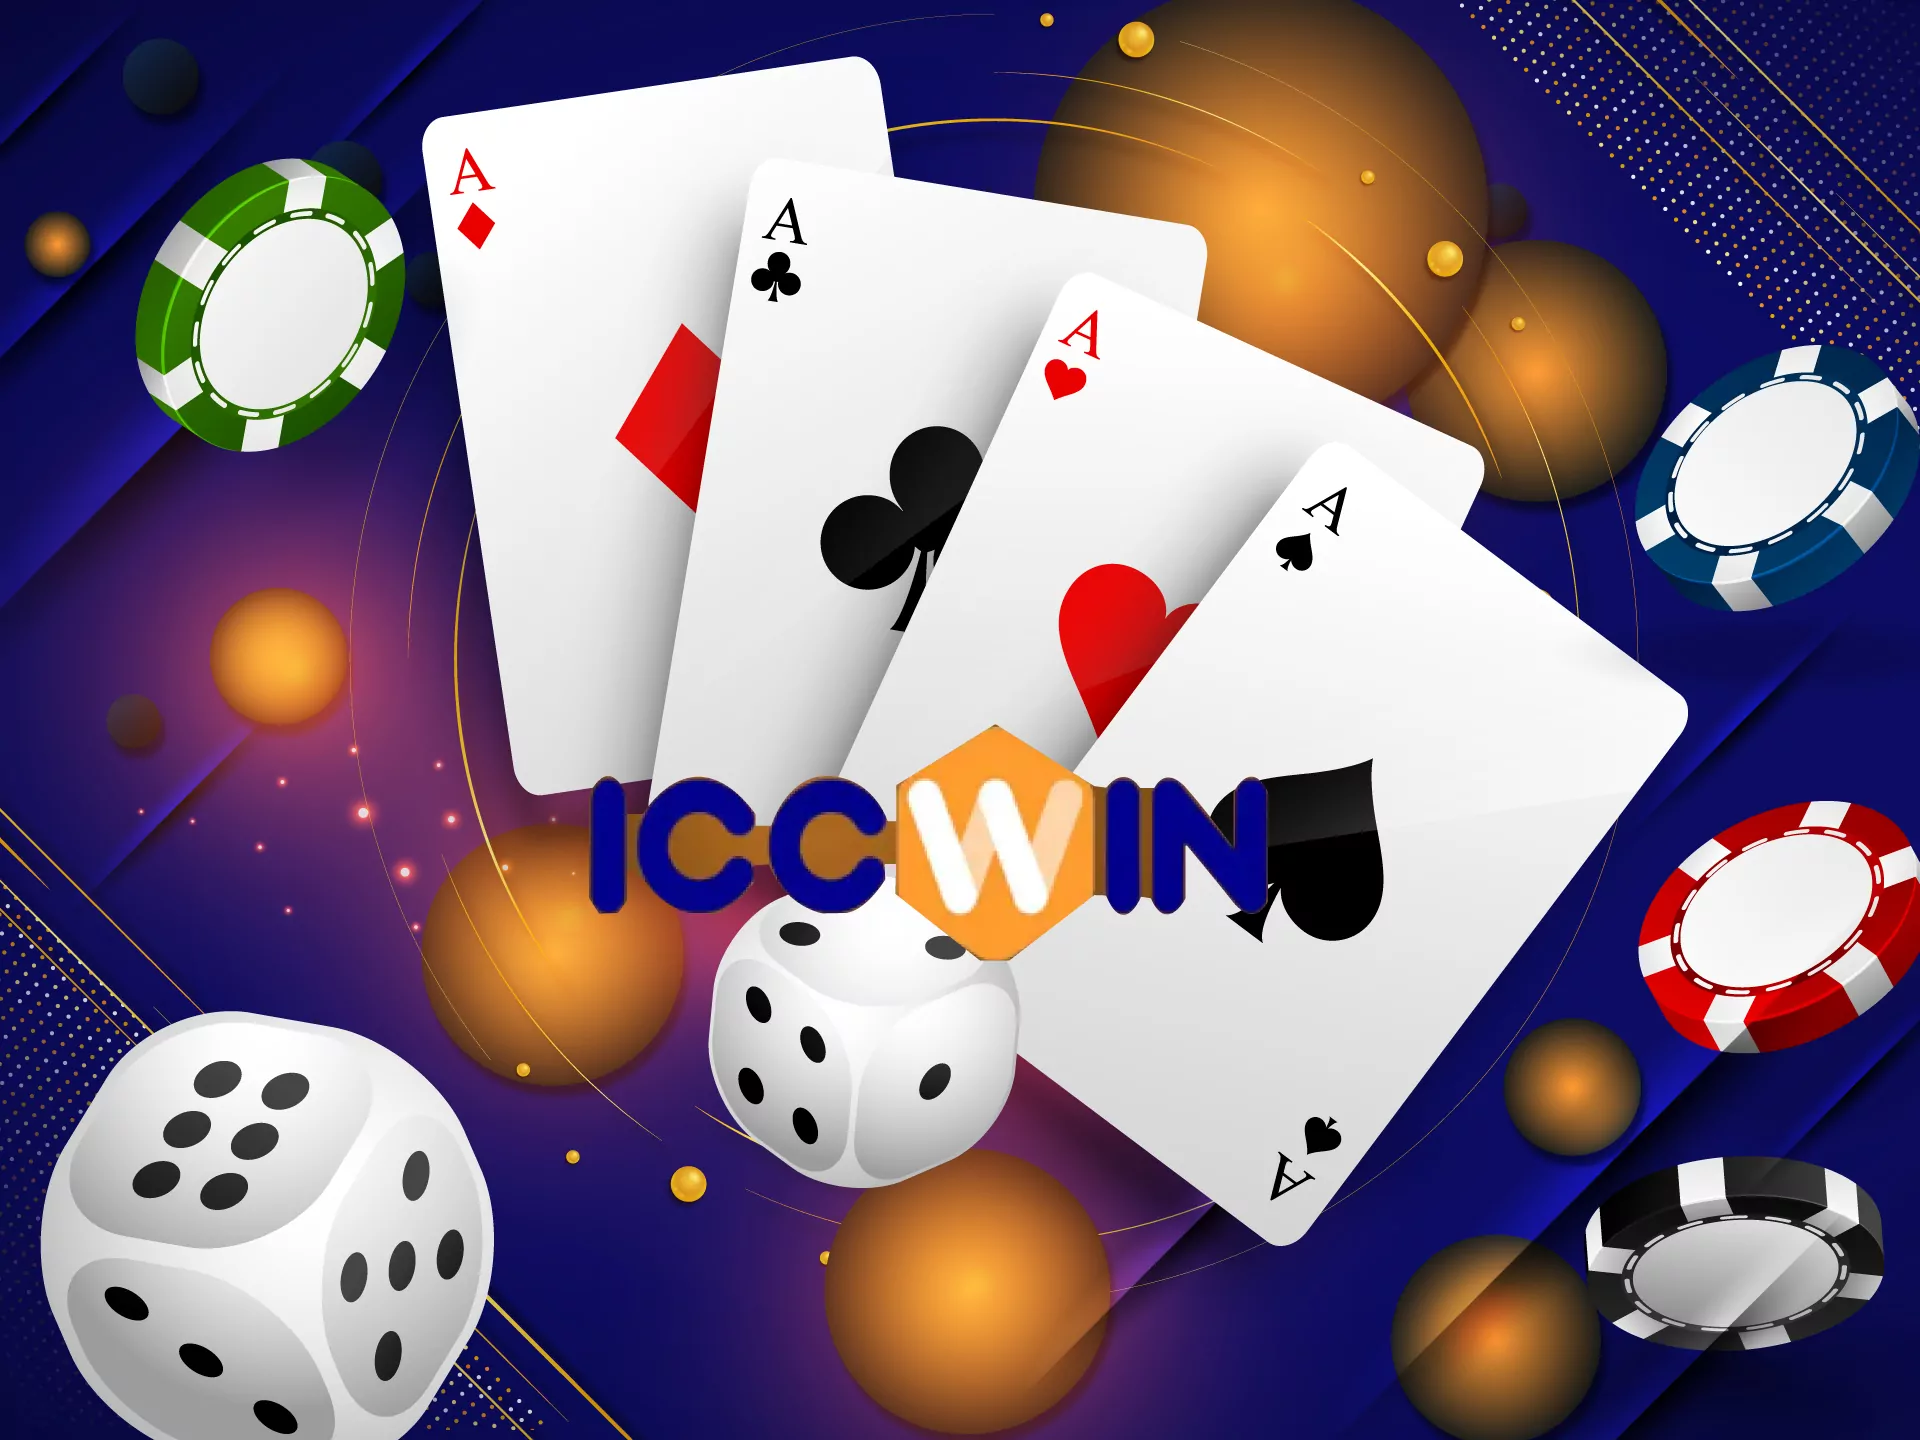 You will find all the classic and popular modern games in the ICCWIN mobile casino.